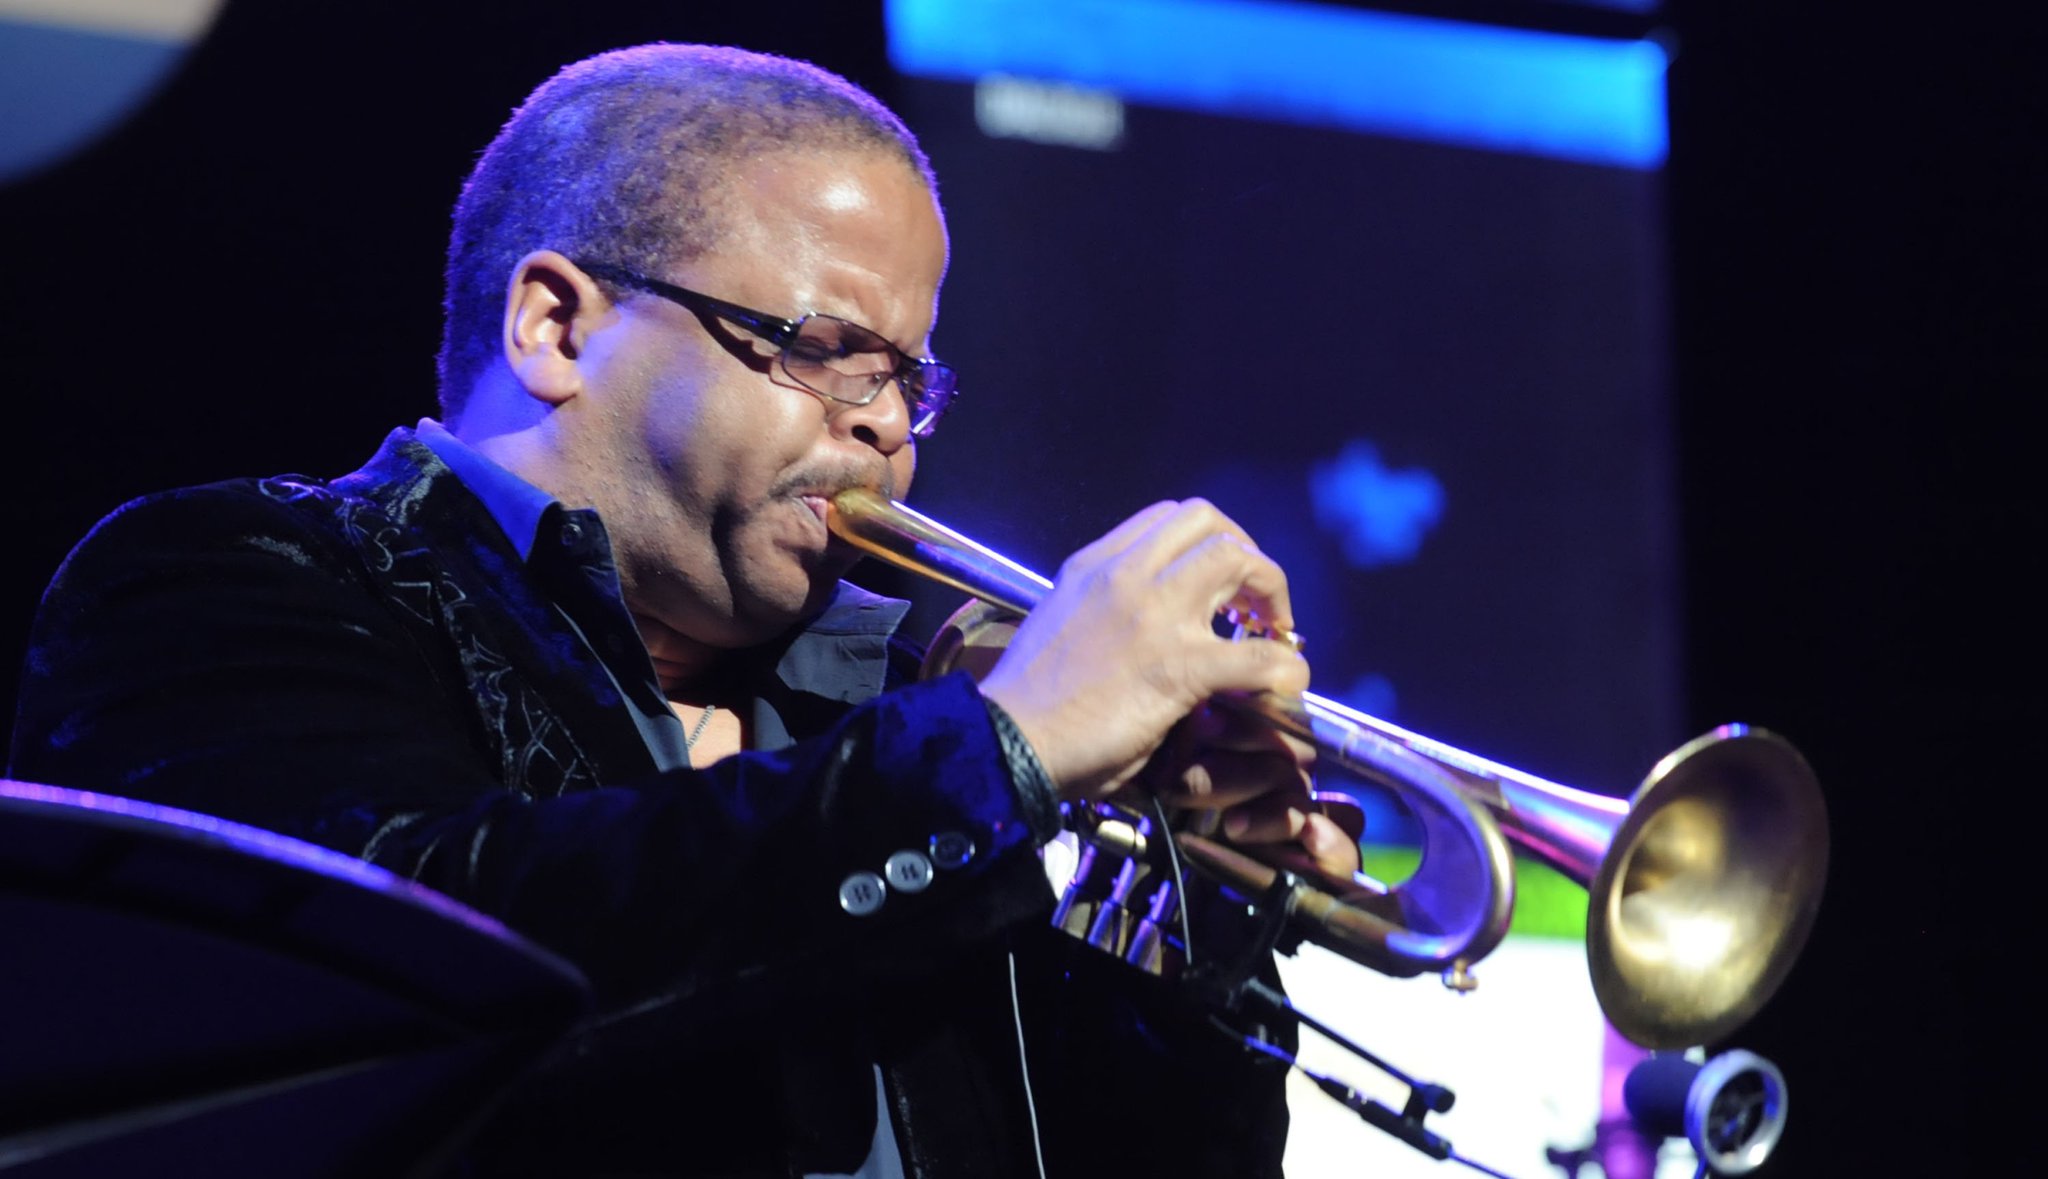 HaPpY BirThDaY!! to 4 - times GRAMMY Winner Terence Blanchard. 